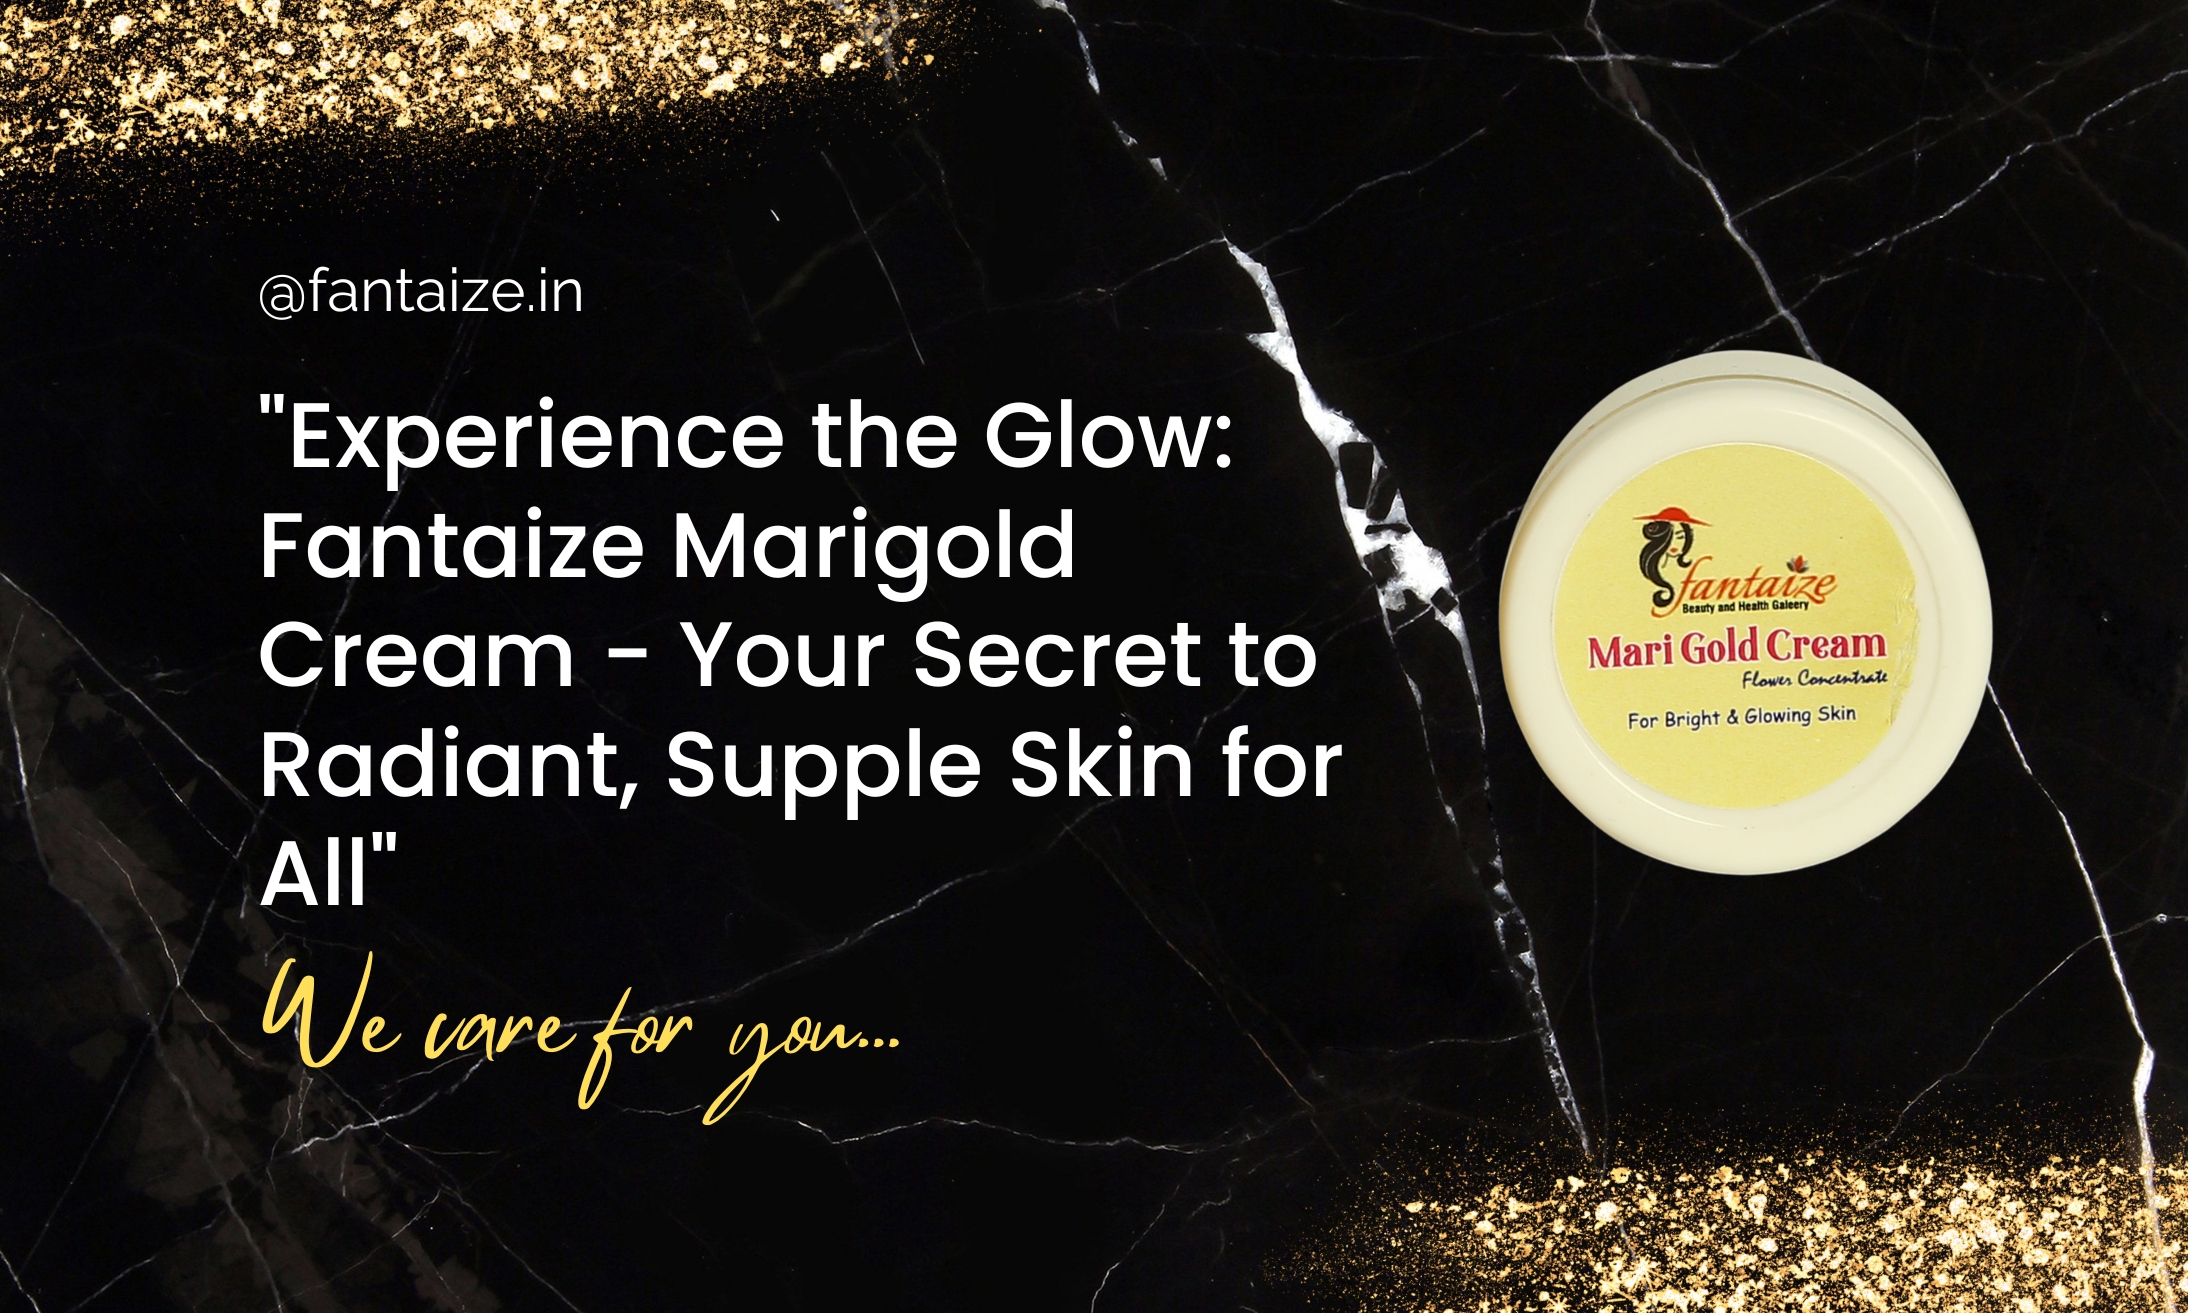 Experience the Glow Fantaize Marigold Cream - Your Secret to Radiant, Supple Skin for All